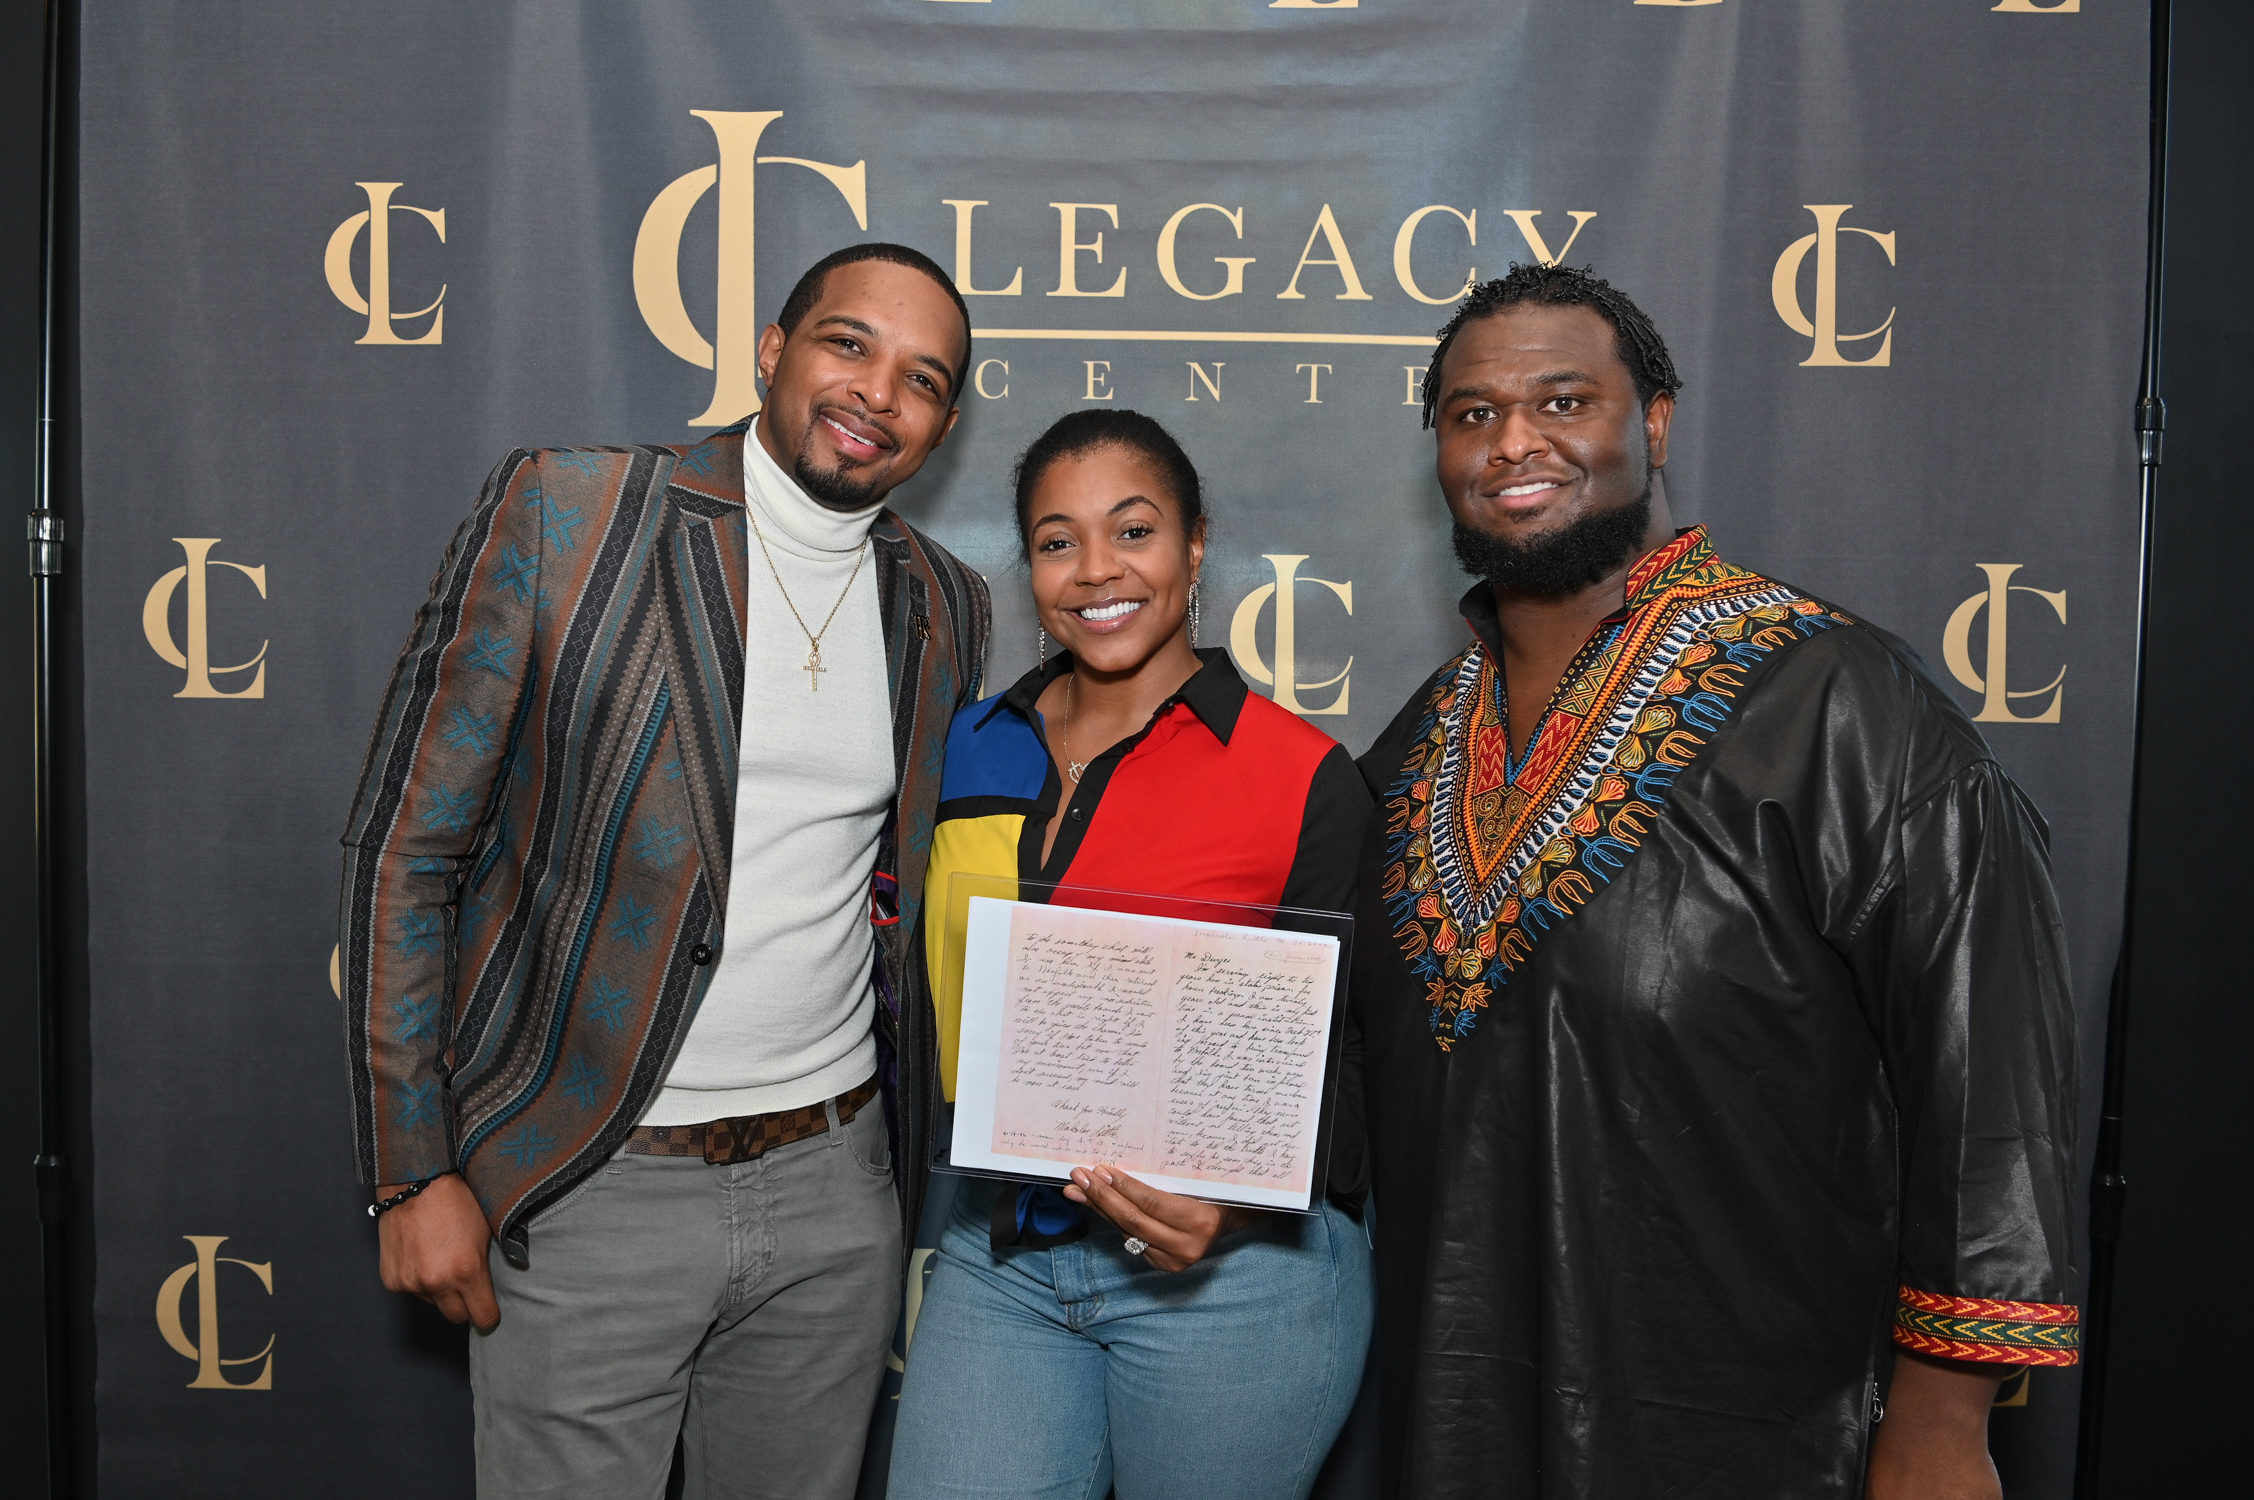 Legacy Center Partners with The African American Cultural Heritage Collection Museum Exhibit to Host the Black History Month Closeout Celebration